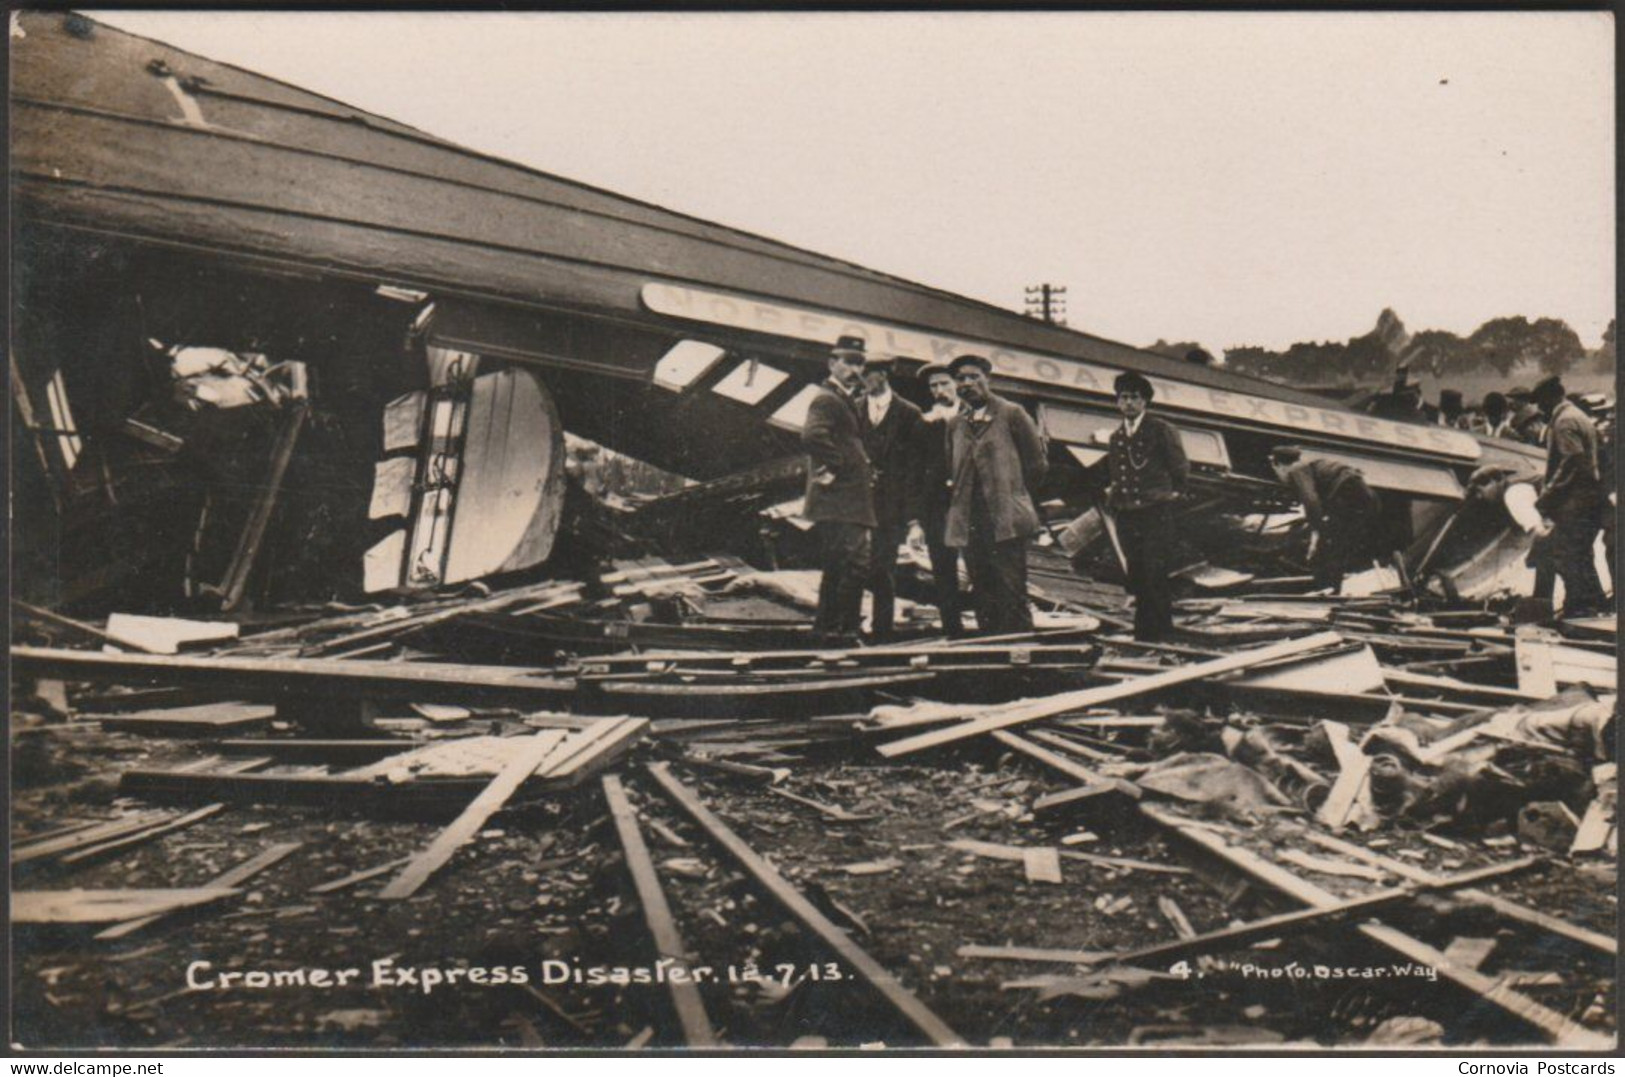 Cromer Express Disaster, Colchester, Essex, 1913 - Four x Cullingford RP Postcards